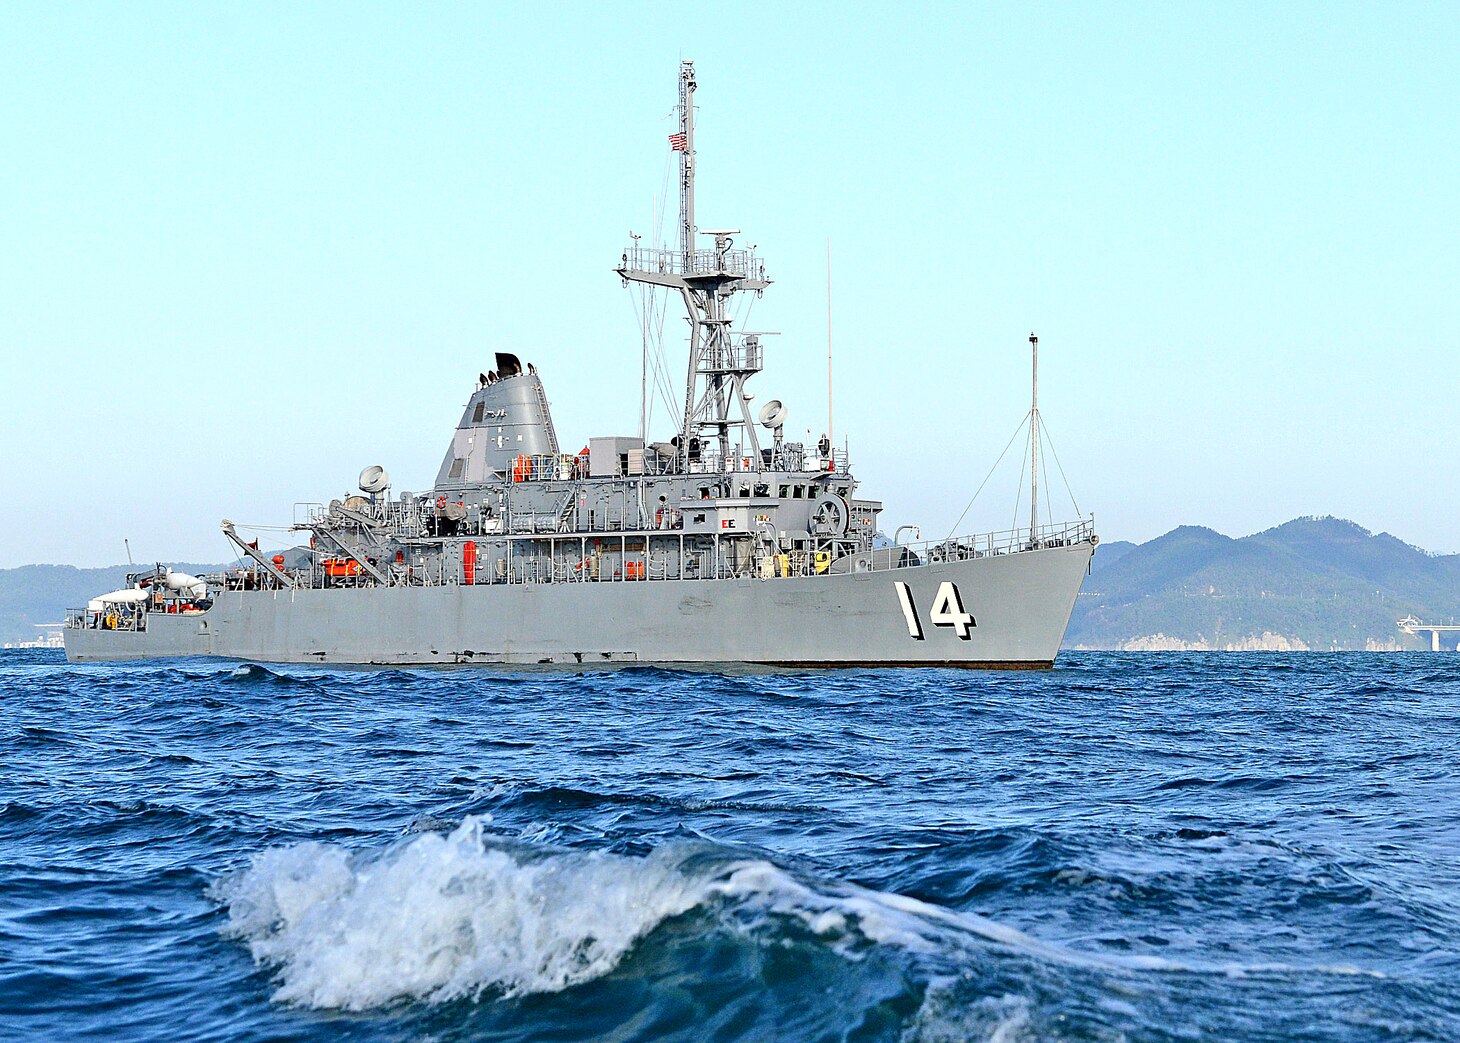 The mine countermeasures ship USS Chief (MCM 14) participates in exercise Clear Horizon 2014 off the coast of the Korean Peninsula, Oct. 23, 2014. Clear Horizon is an annual bilateral exercise between the U.S. and South Korean navies designed to enhance cooperation and improve capabilities in mine countermeasure operations. (U.S. Navy photo by Mass Communication Specialist 1st Class Frank L. Andrews/Released)